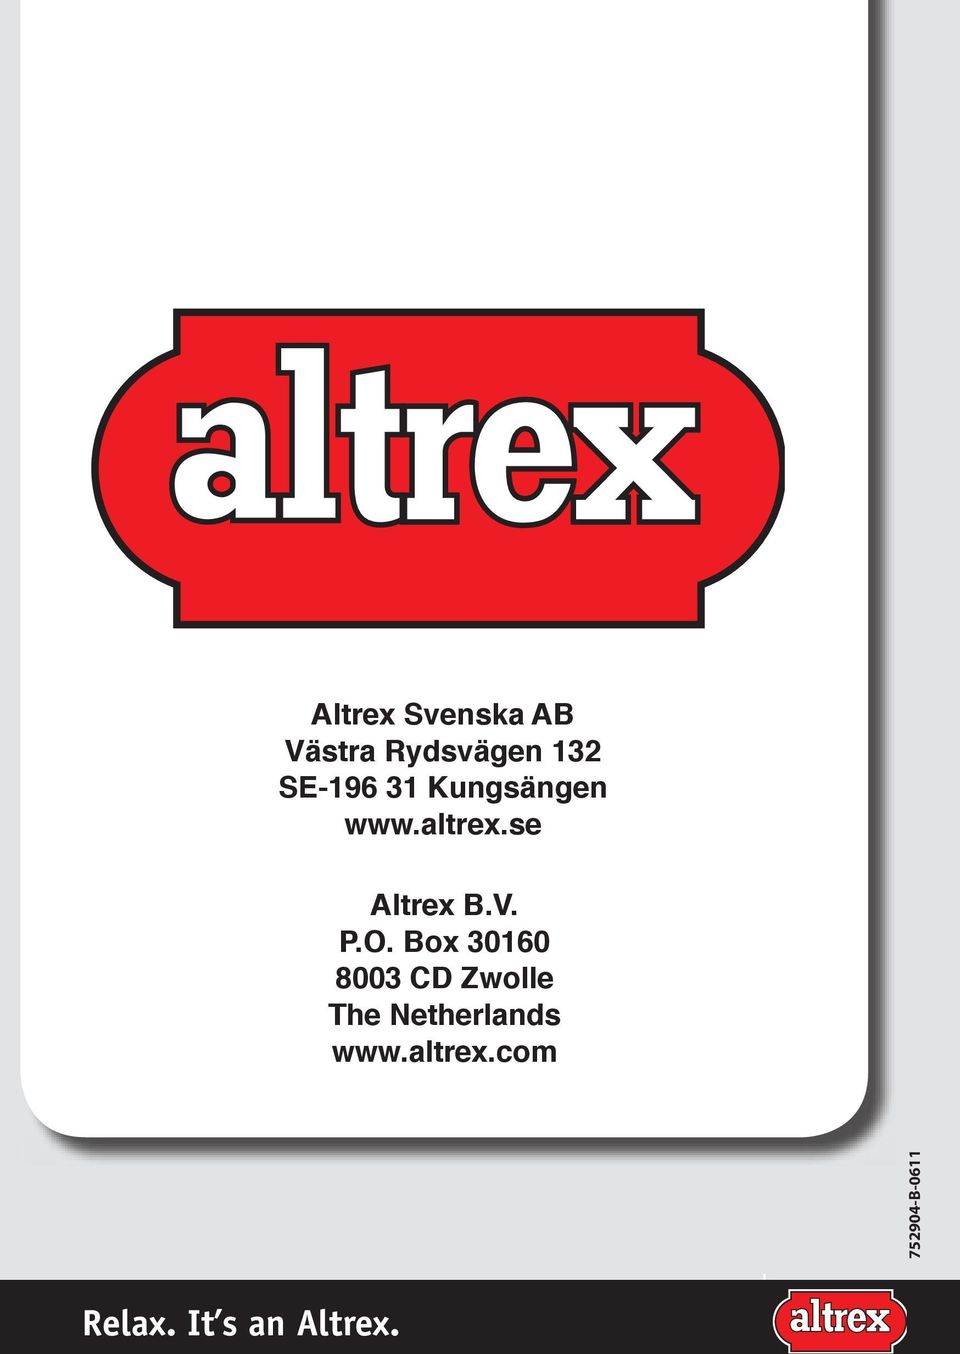 Box 30160 8003 CD Zwolle The Netherlands www.altrex.